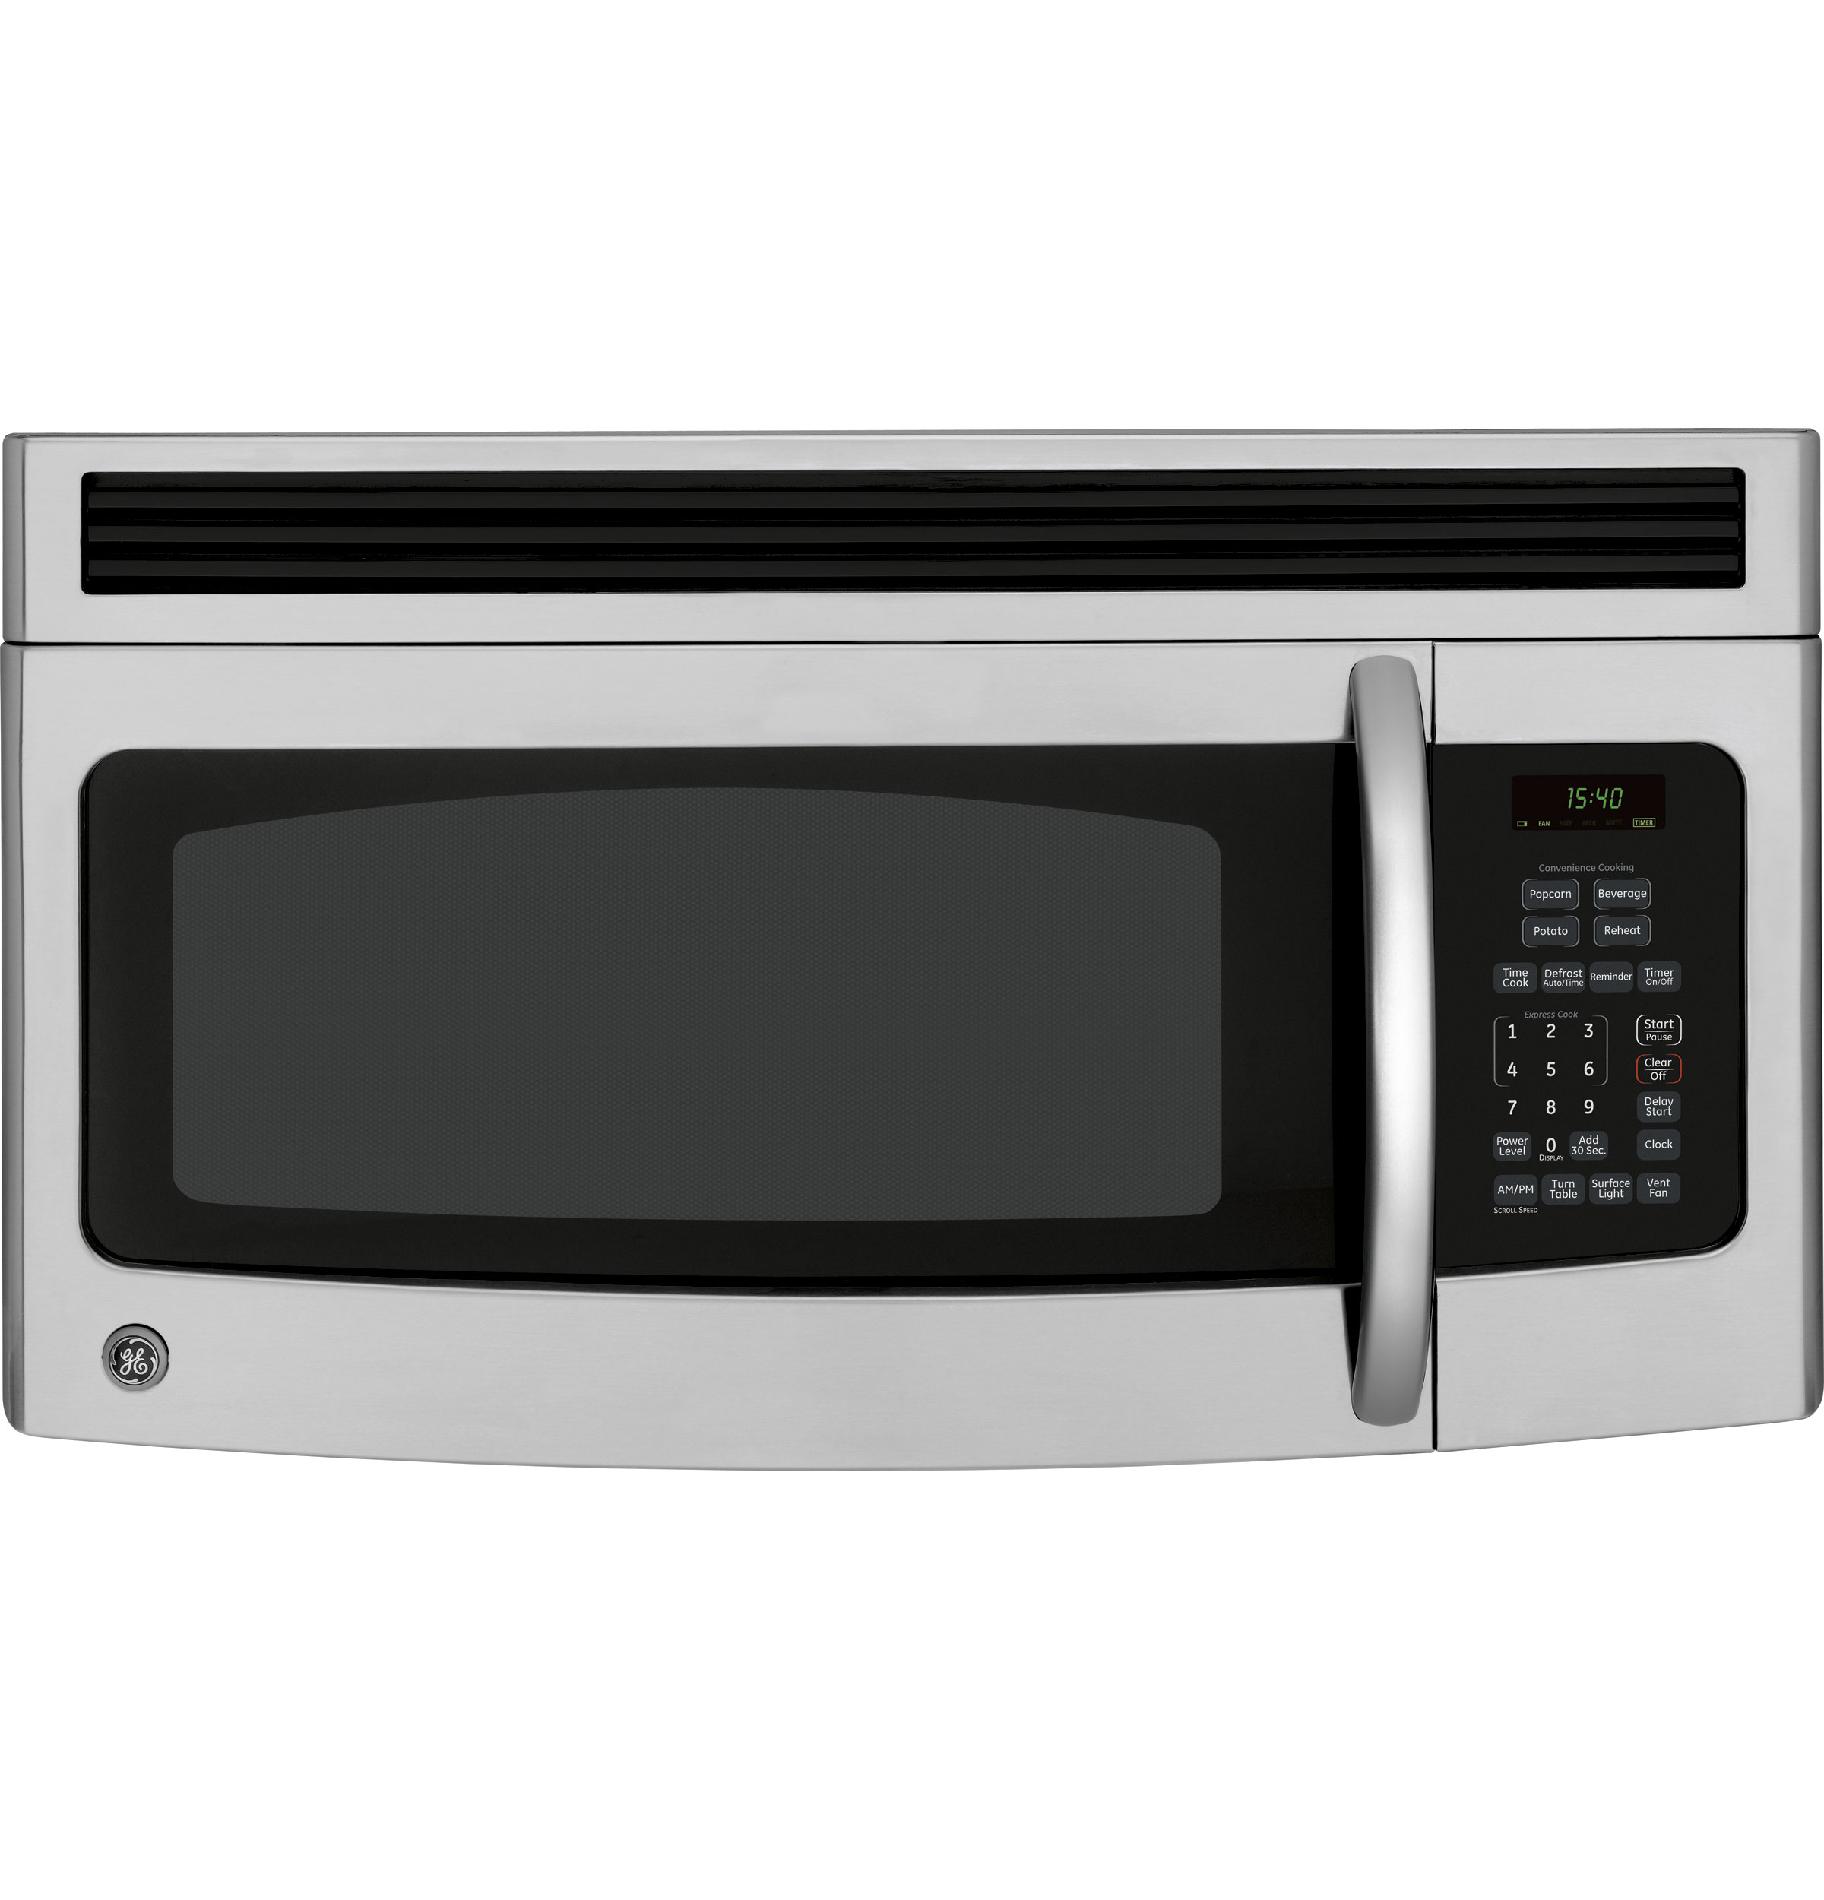 GE Appliances JVM1540SMSS 30" Over the Ran Microwave Oven - Stainless Steel